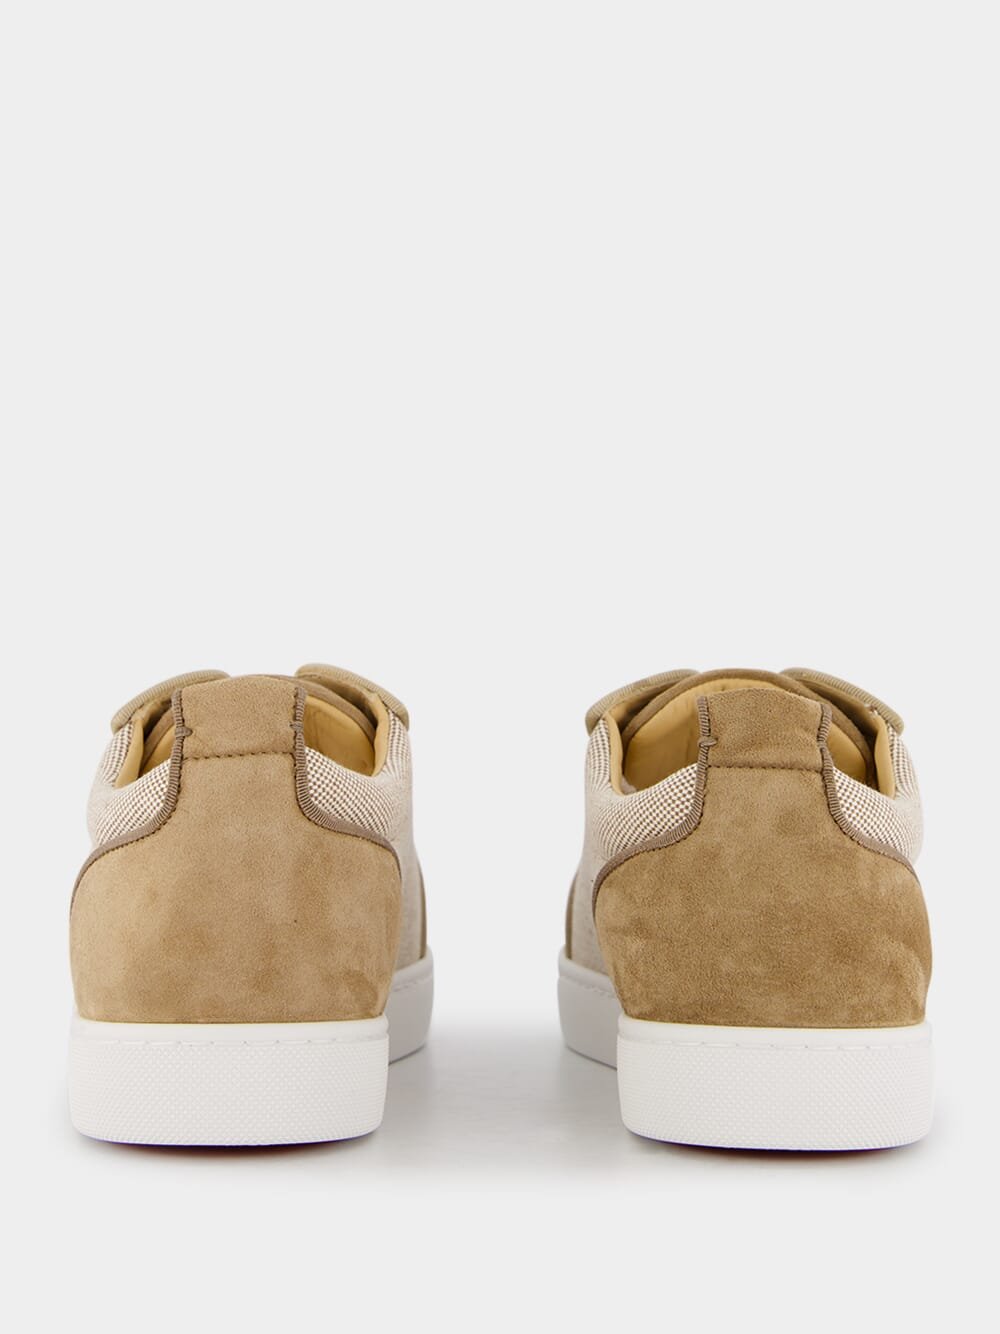 Christian LouboutinLouis Junior Suede Sneakers at Fashion Clinic